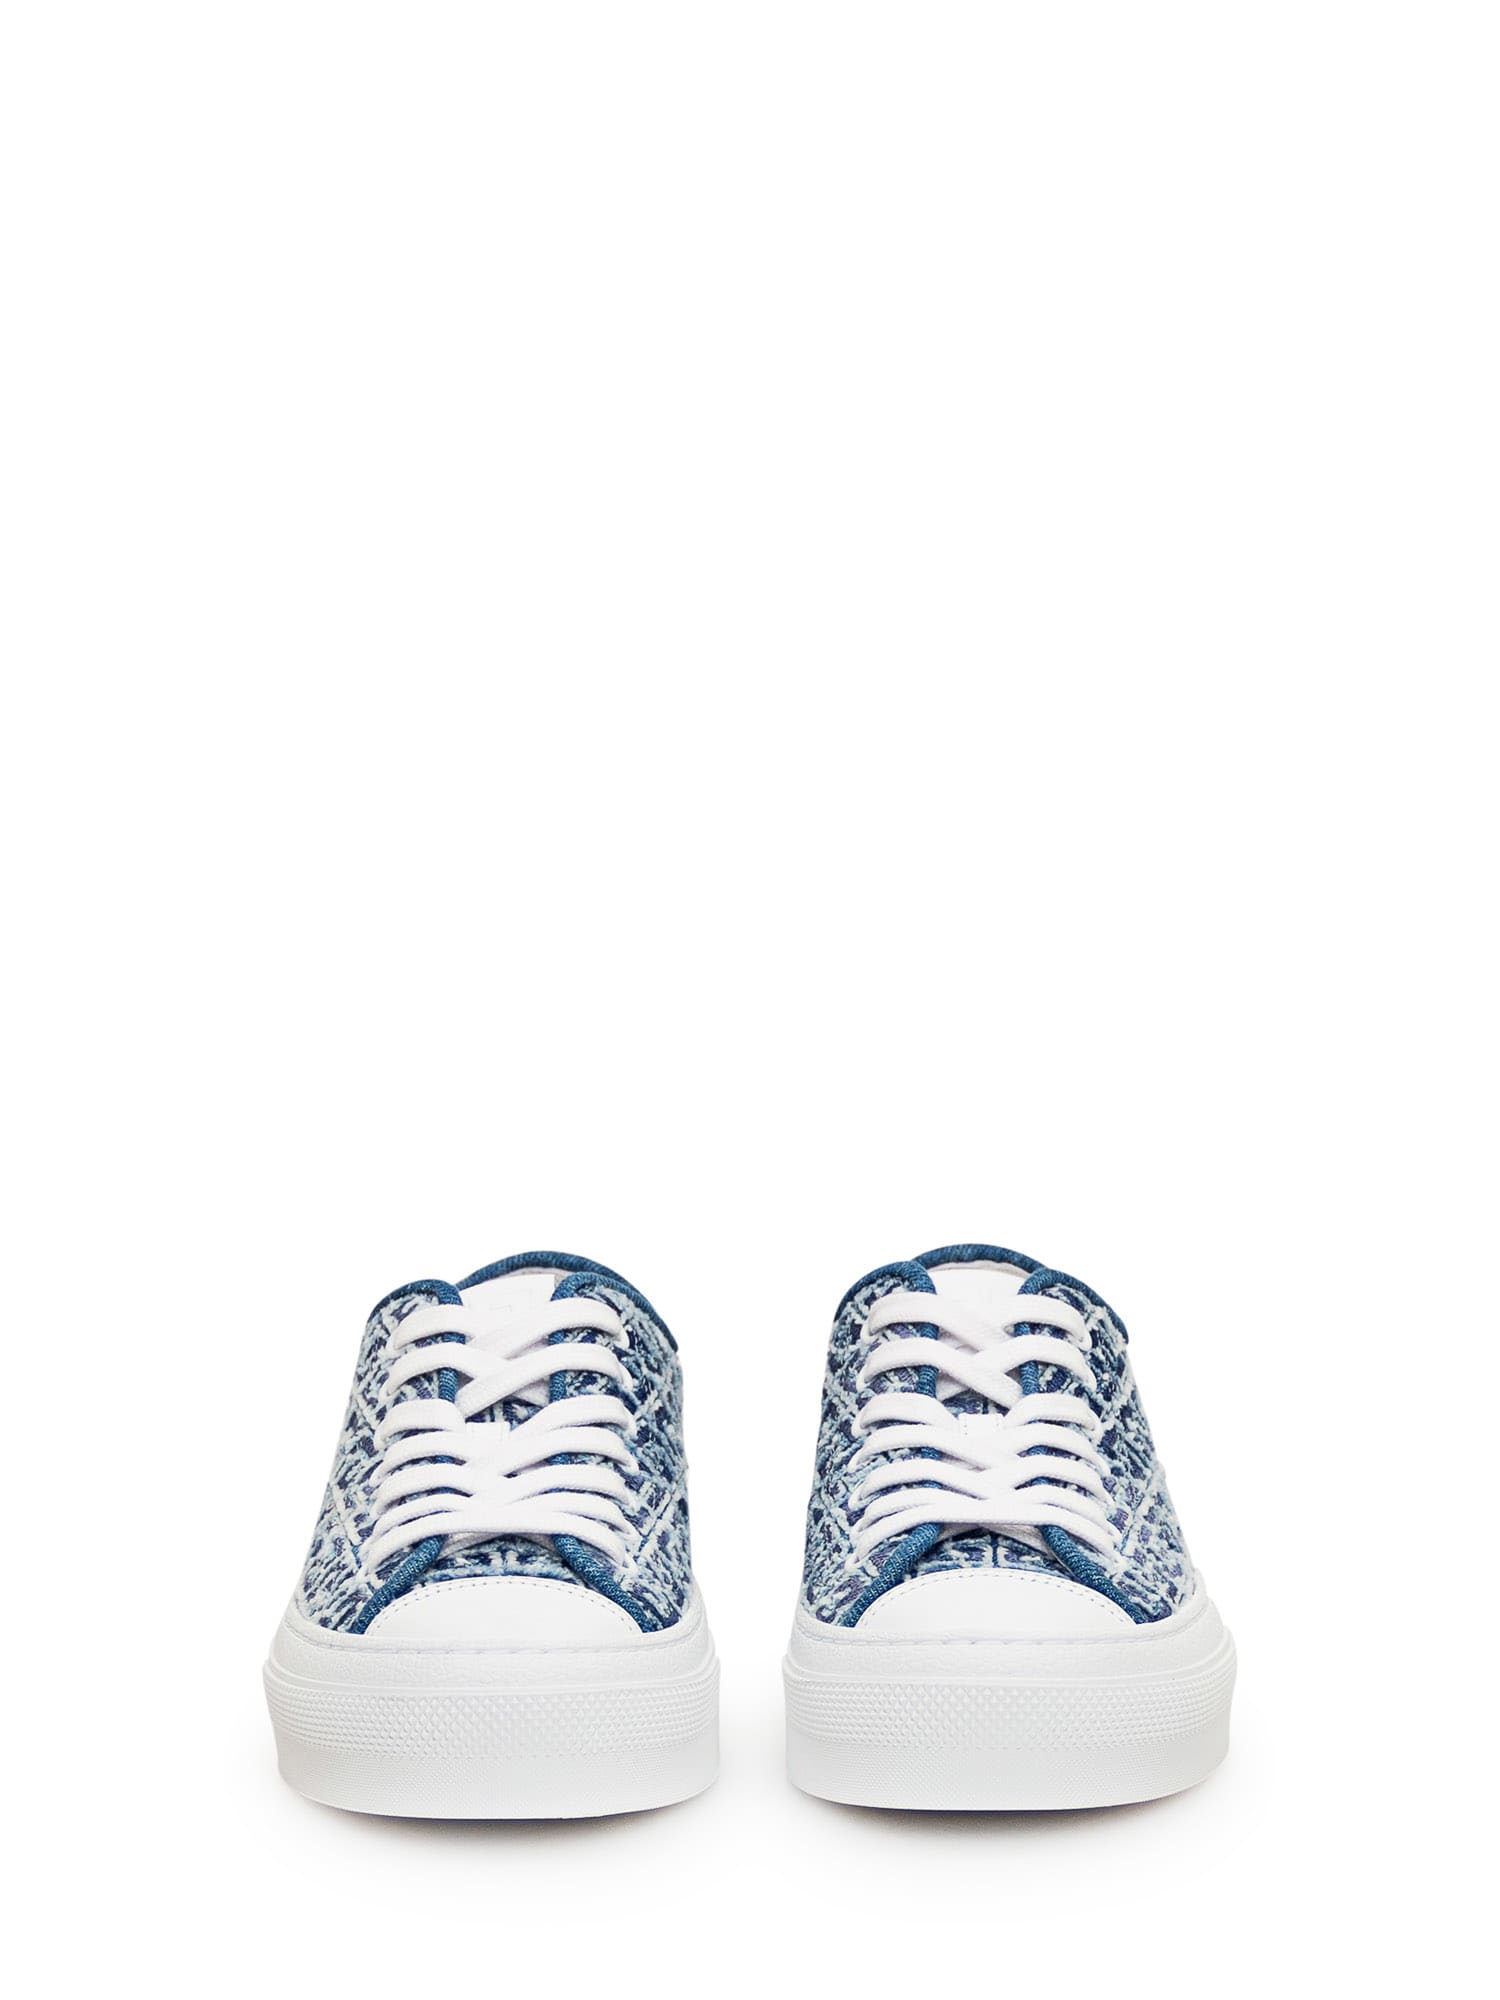 Shop Givenchy City Low Sneaker In Medium Blue